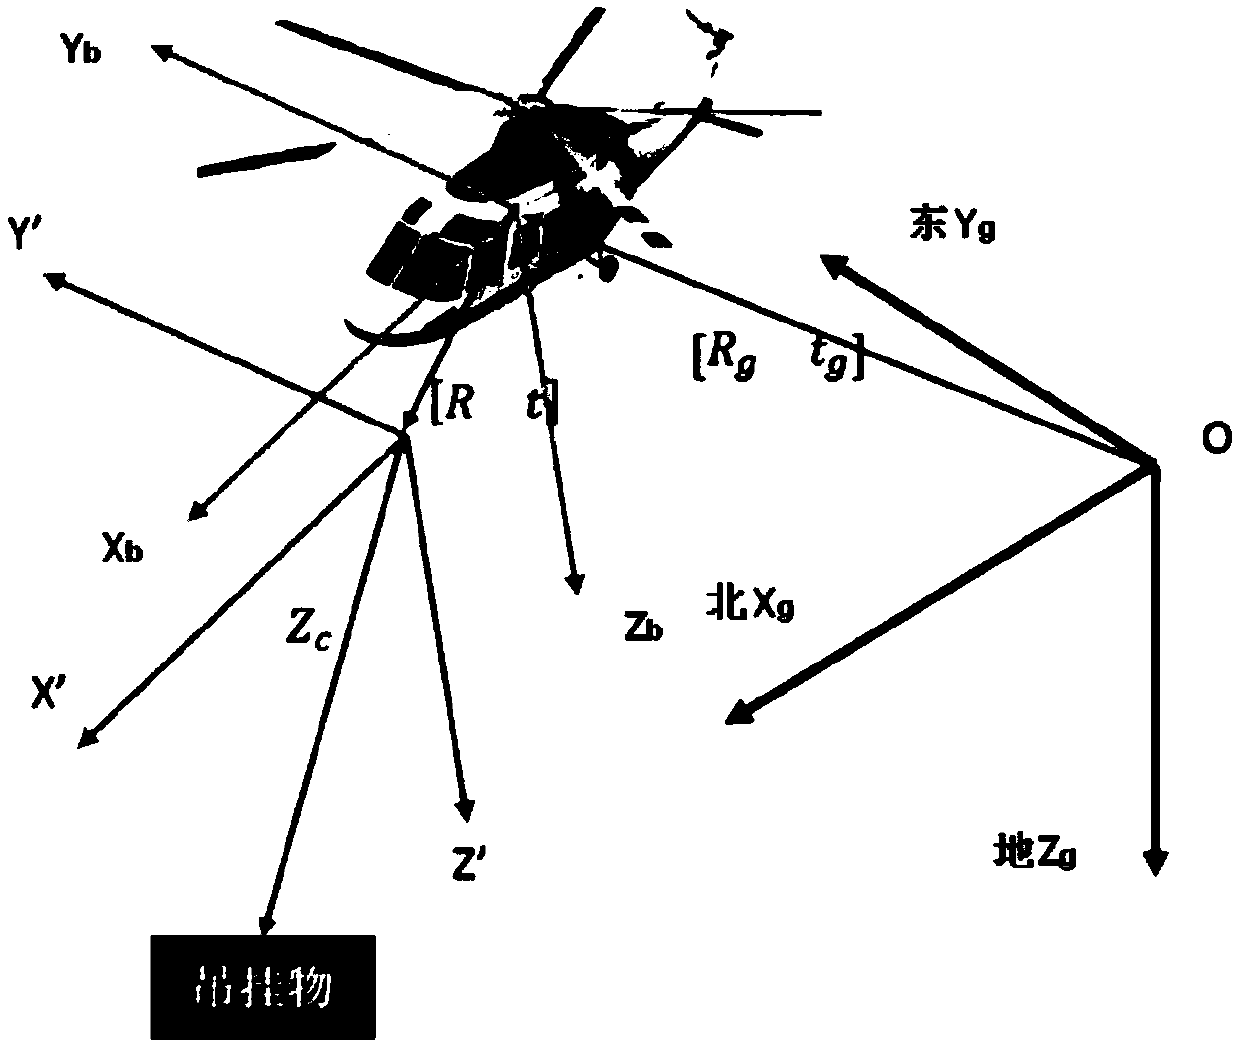 Non-contact motion measurement method for object suspended by helicopter